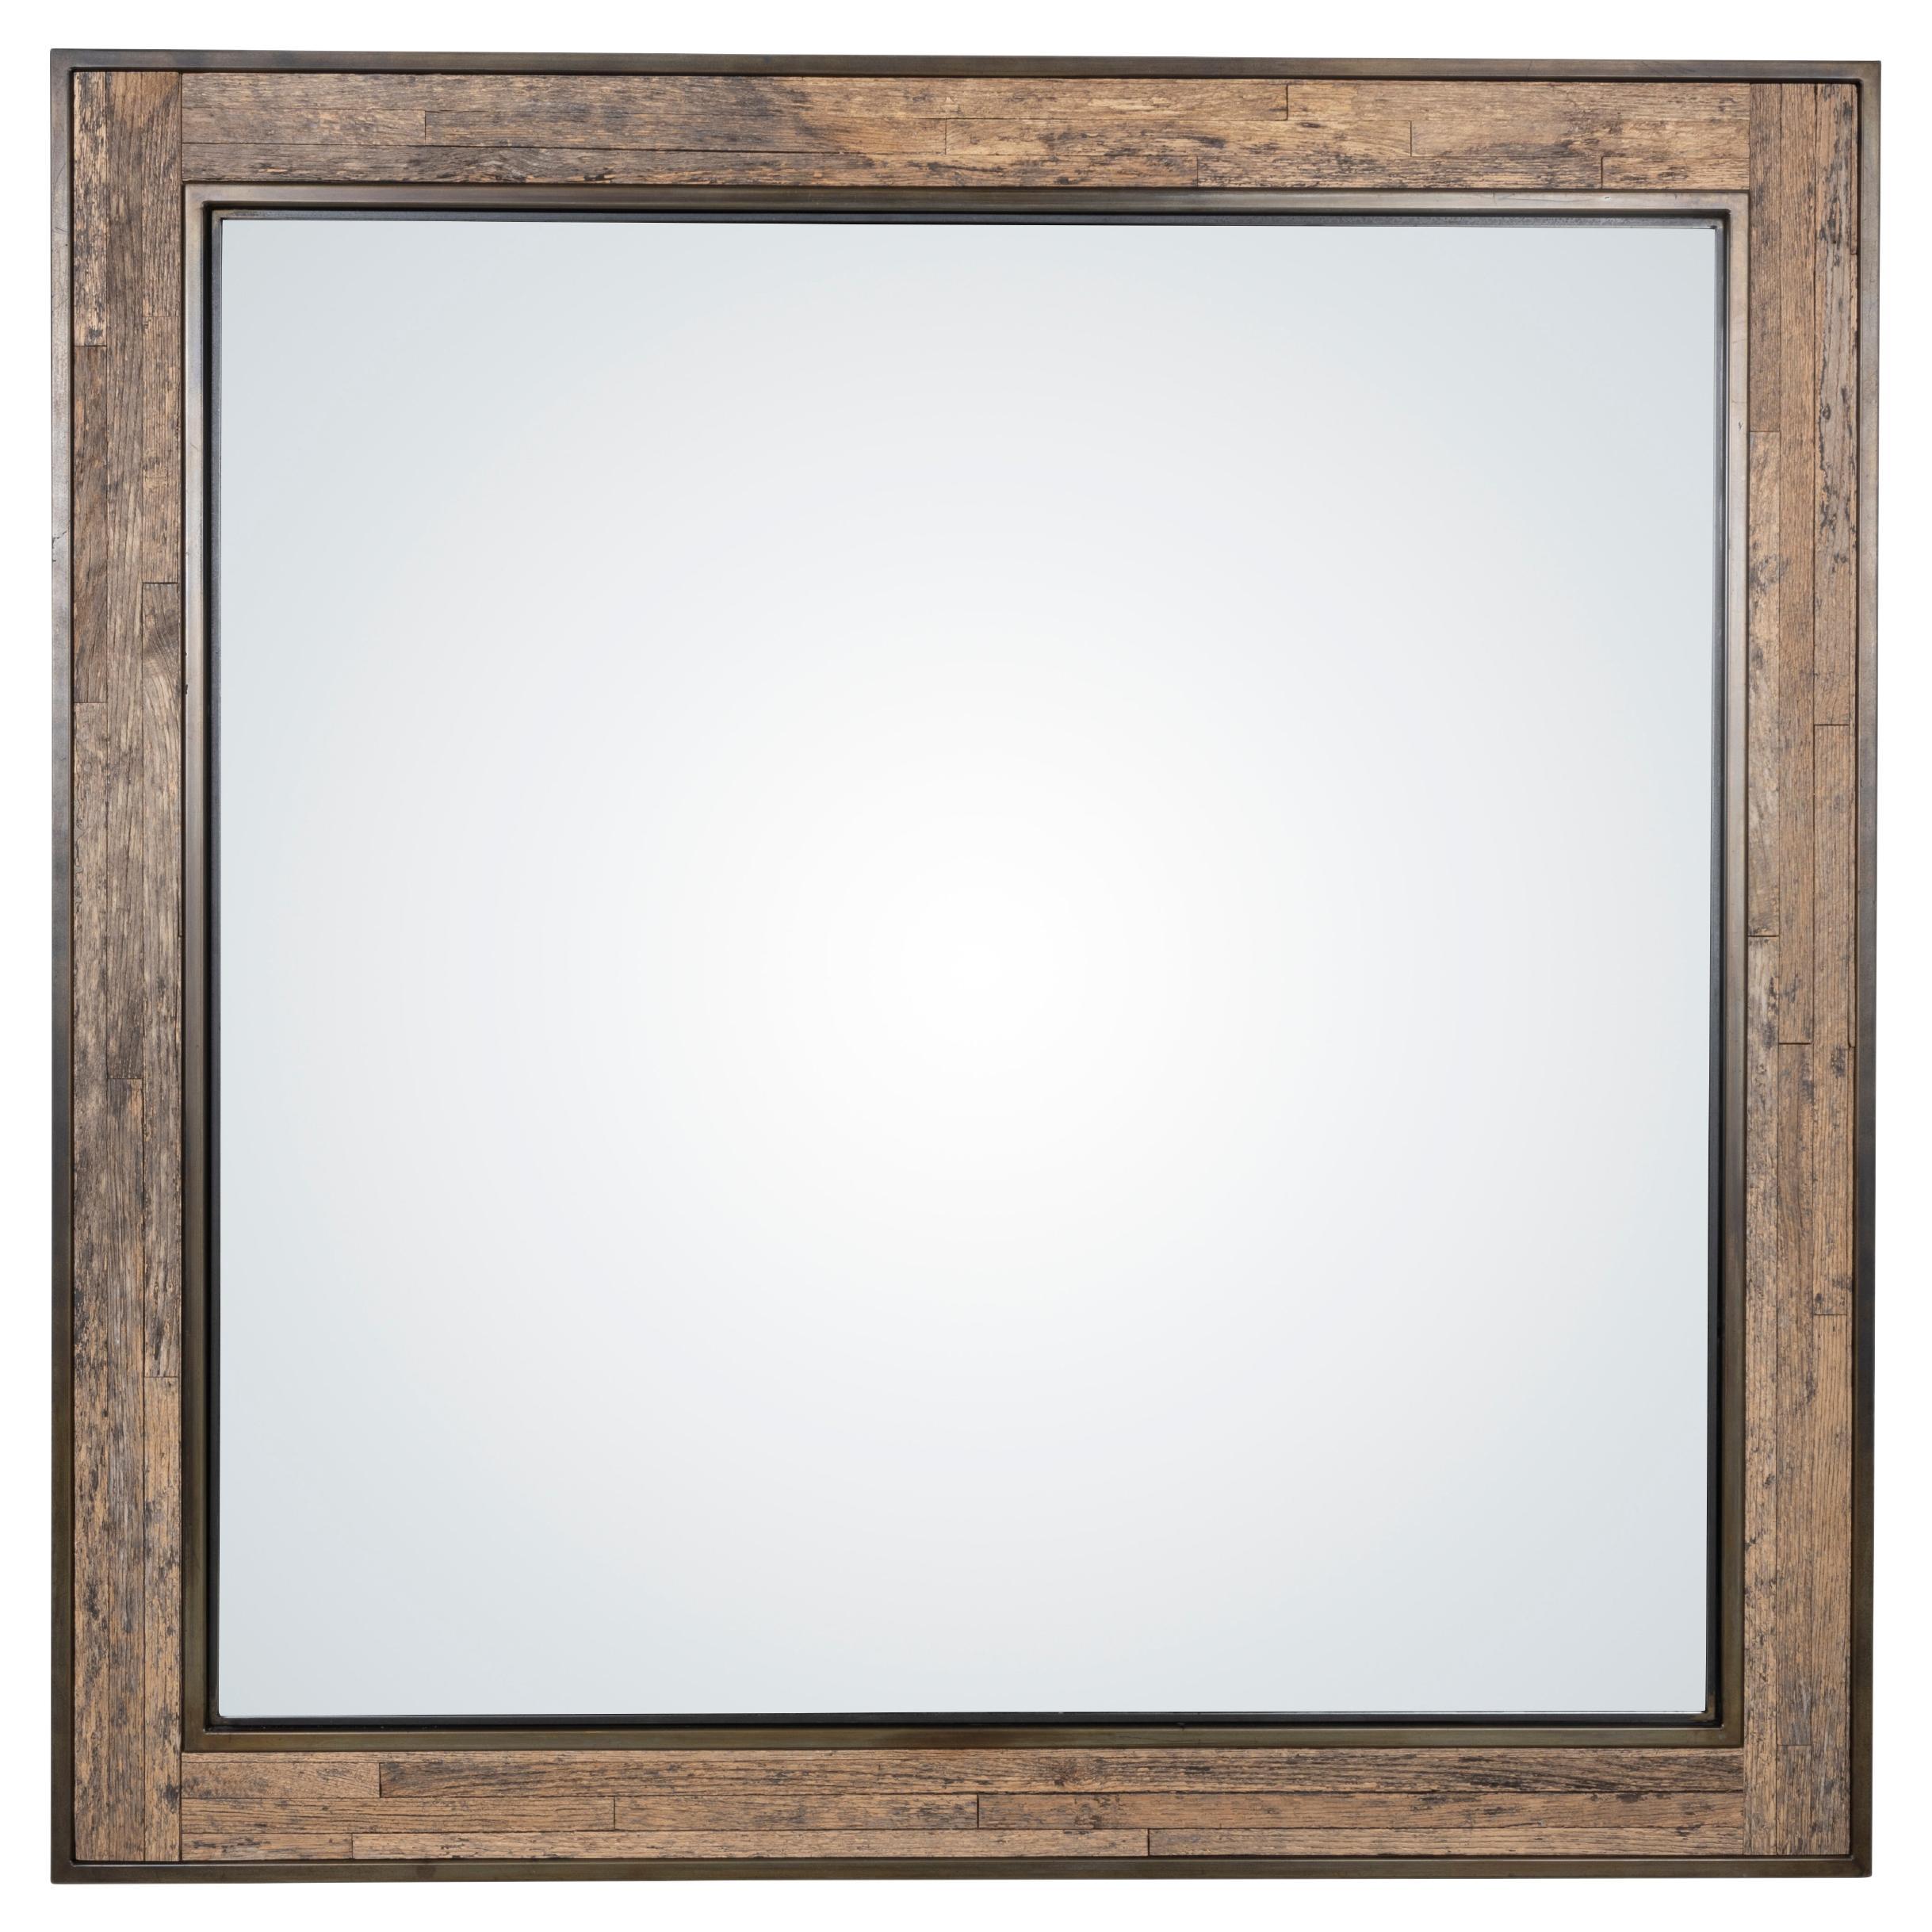 Square Metal Frame Mirror with Wood Panel Inlay